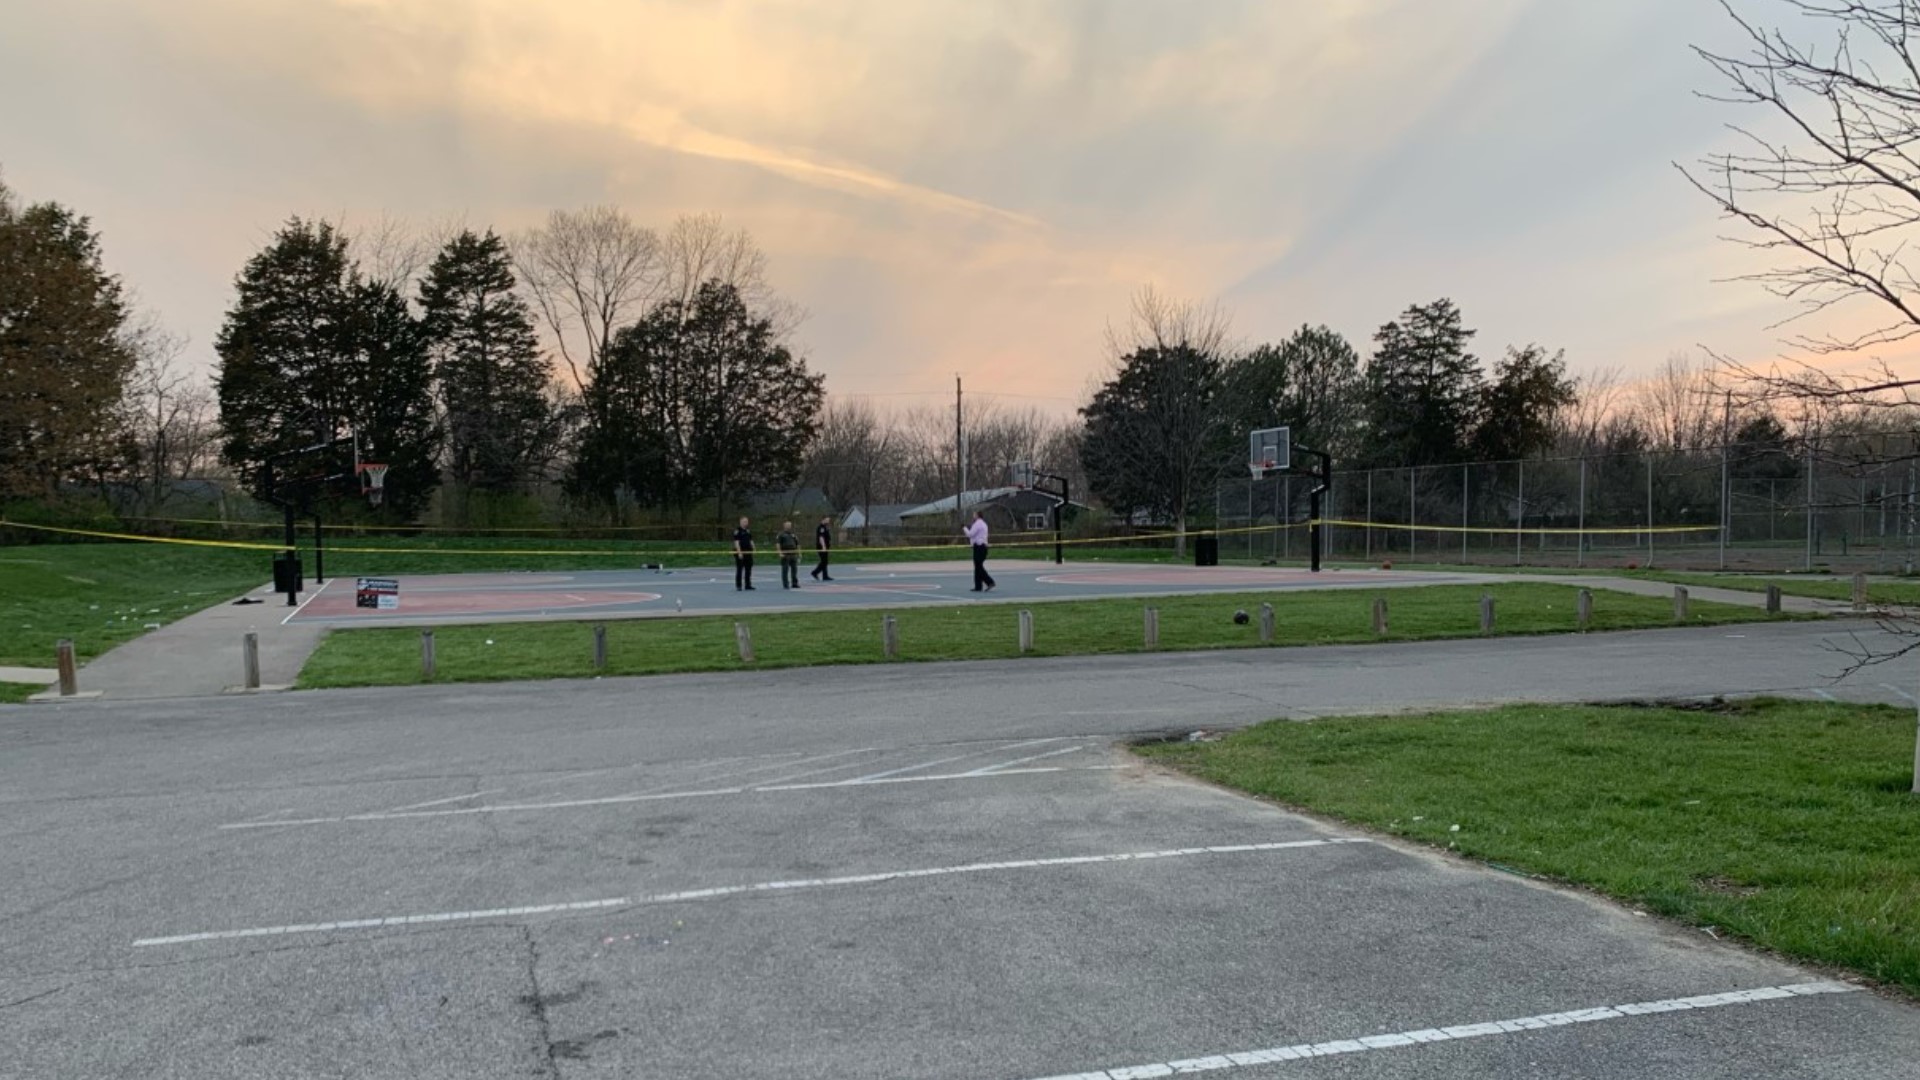 The incident happened shortly before 7 p.m. at the basketball court in Grassy Creek Regional Park.